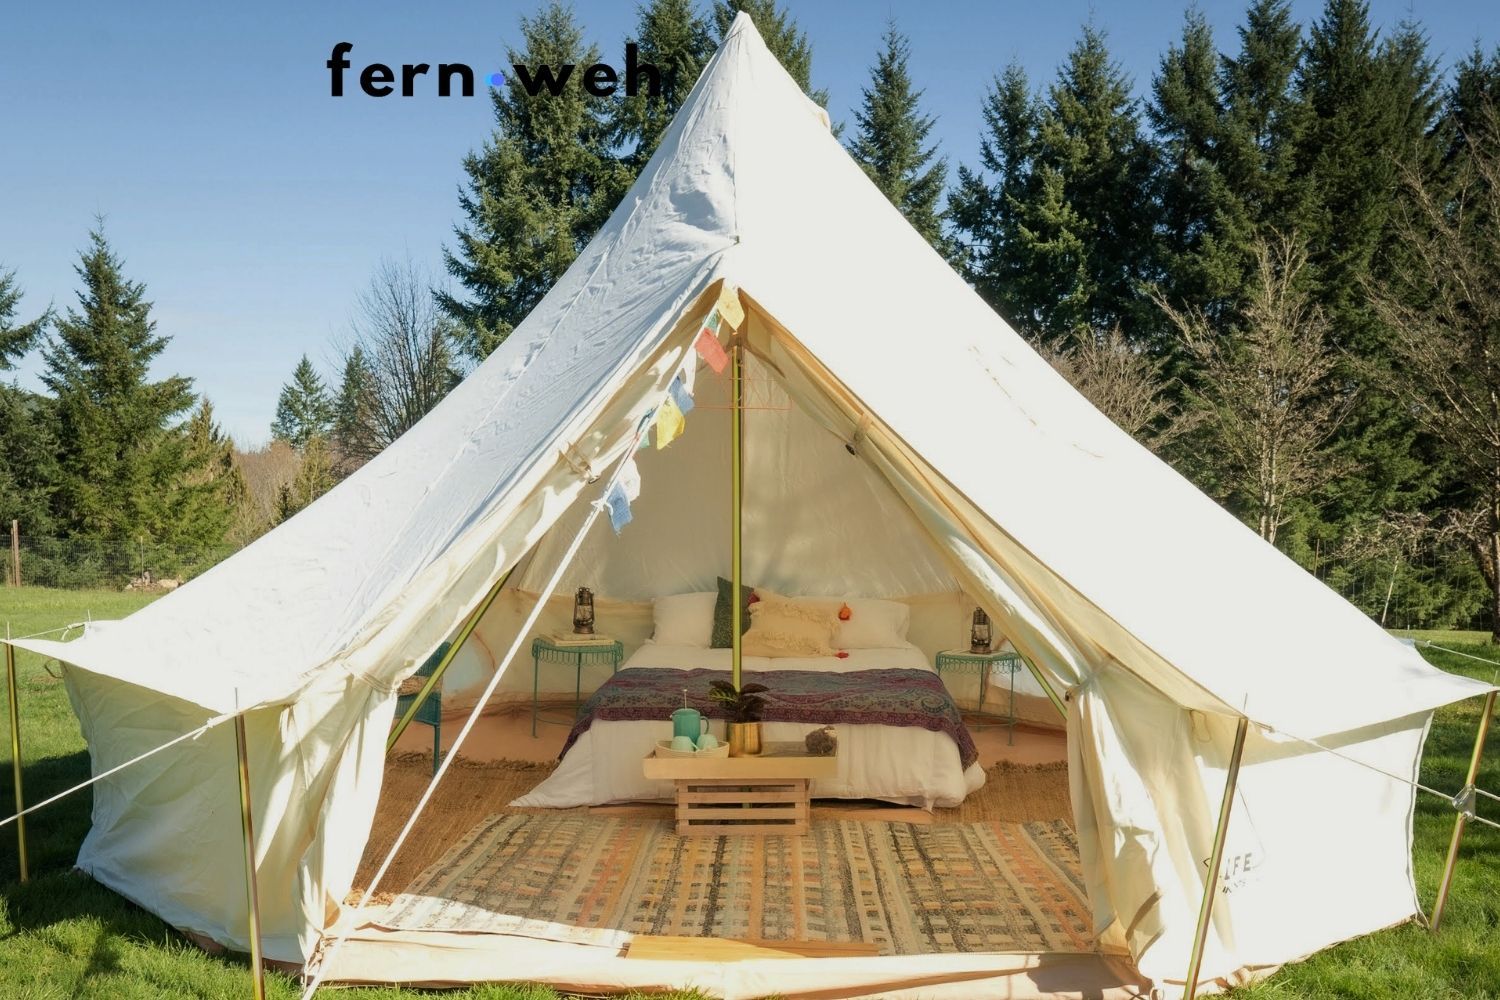 fernweh bell tent by life intents